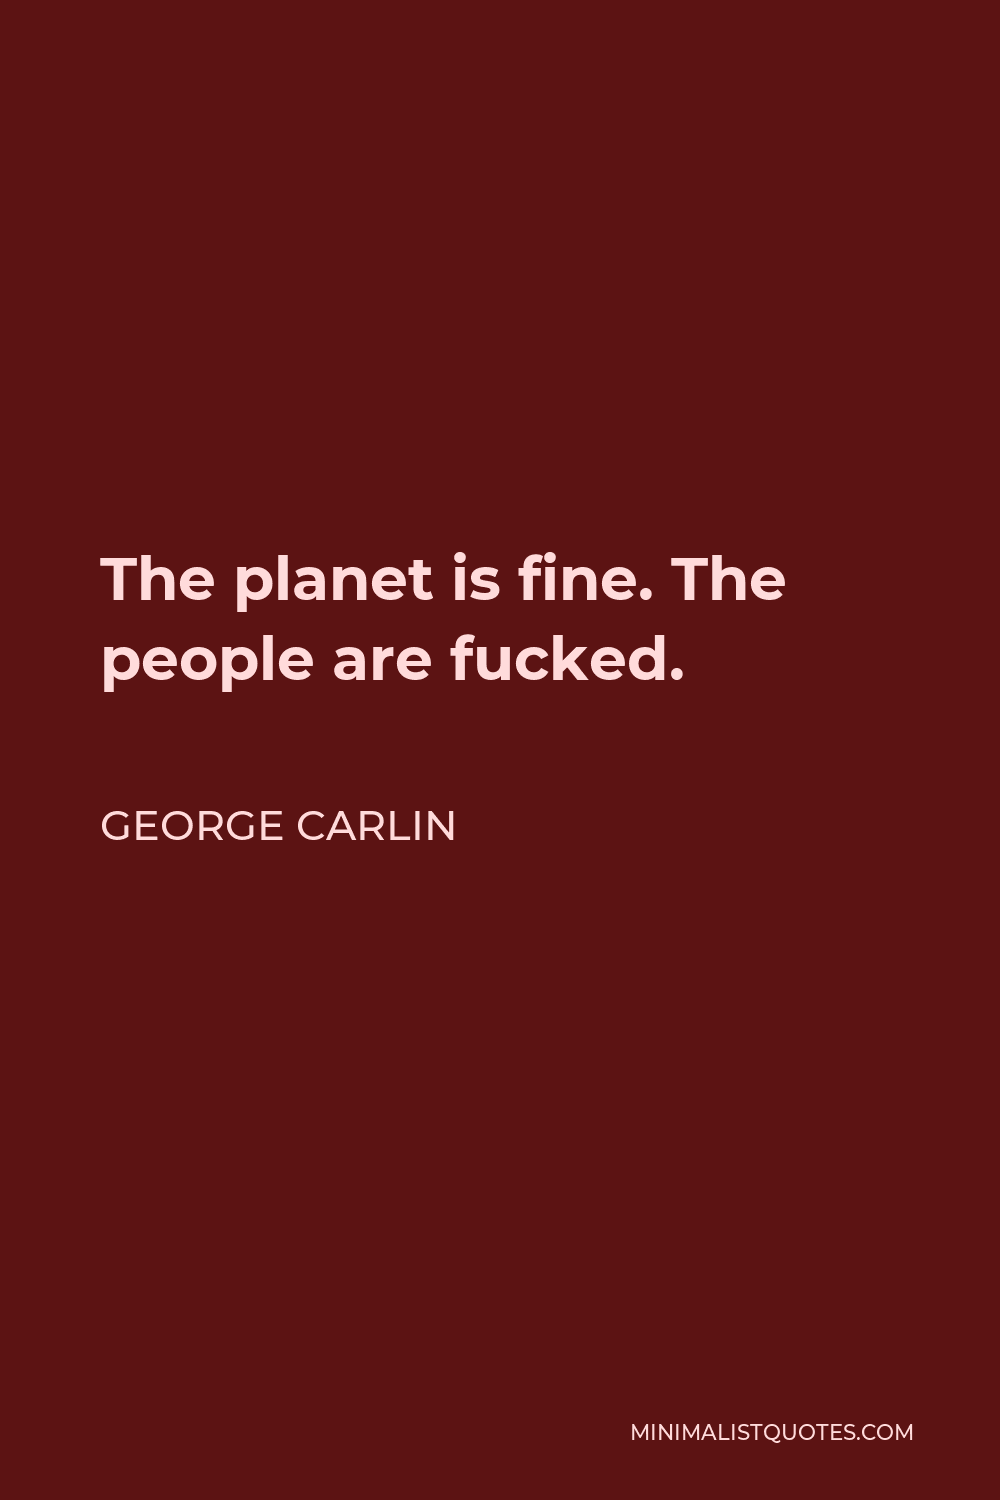 George Carlin Quote - The planet is fine. The people are fucked.